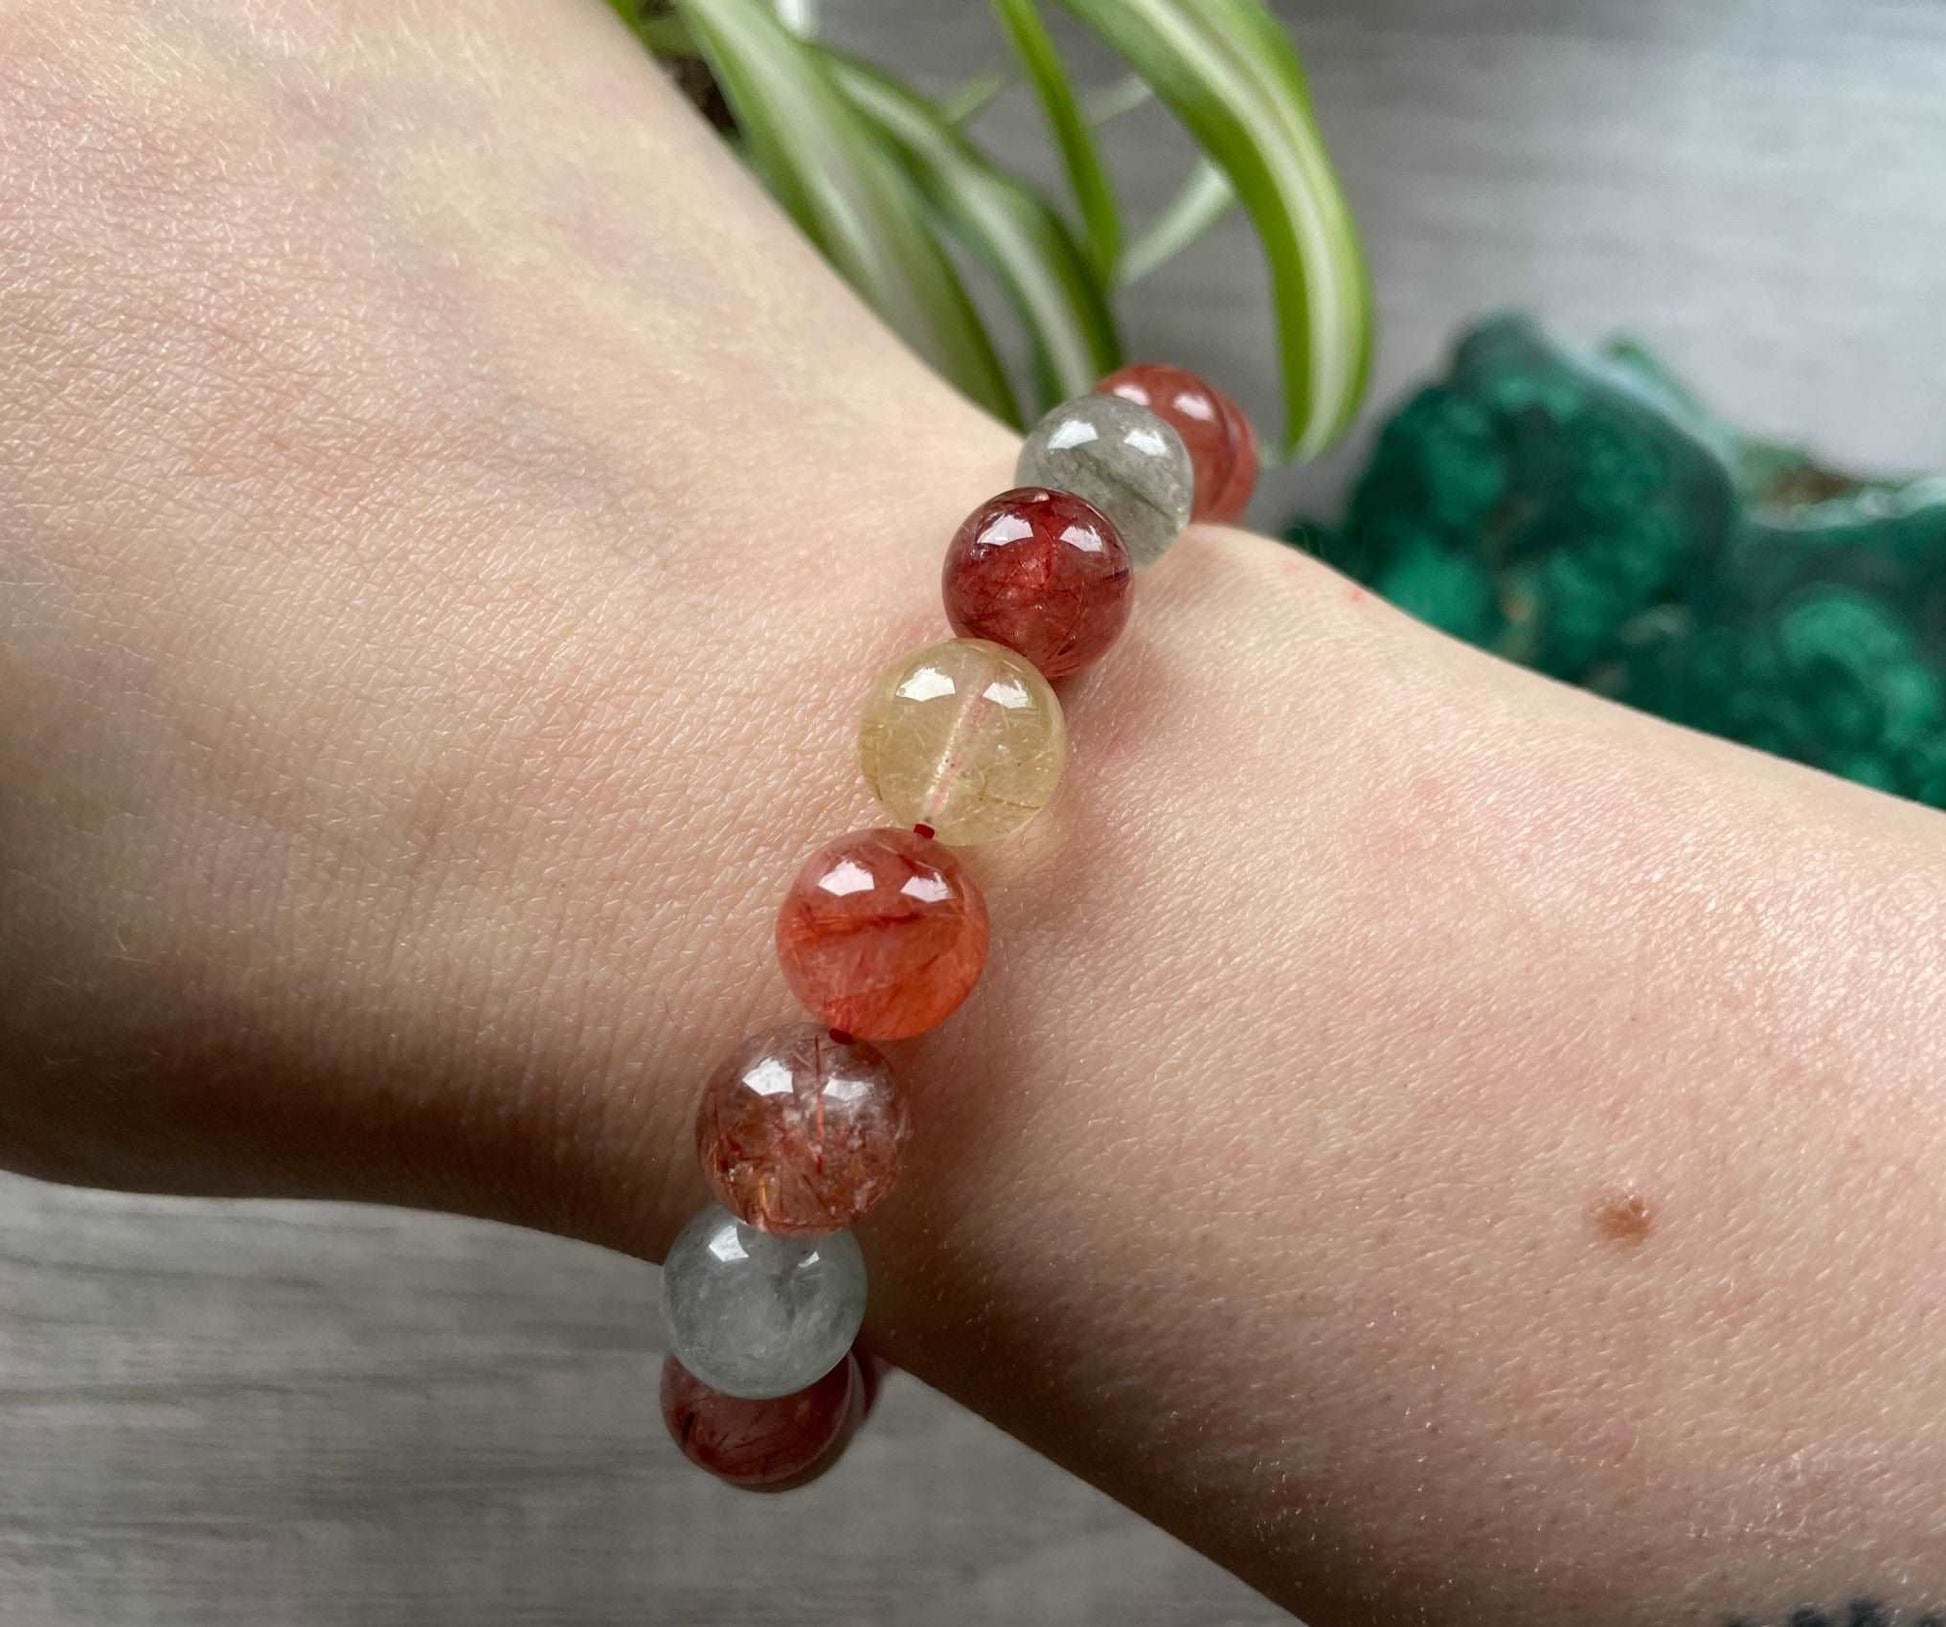 Pictured is a colourful rutilated quartz bead bracelet.